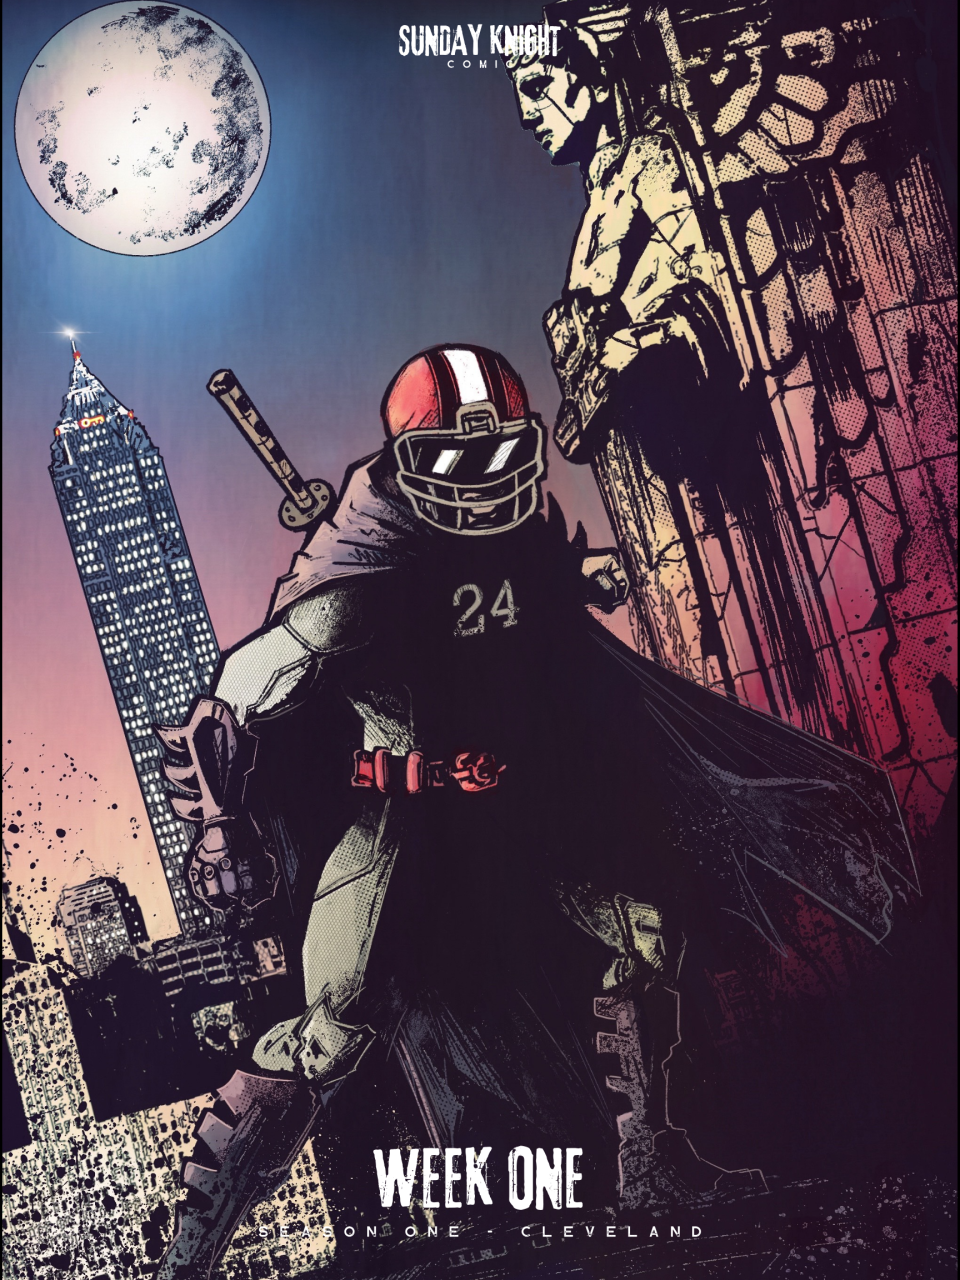 Nick Chubb's Batman character in Sunday Knight Comic before the Cleveland Browns opened the 2022 season against the Carolina Panthers.